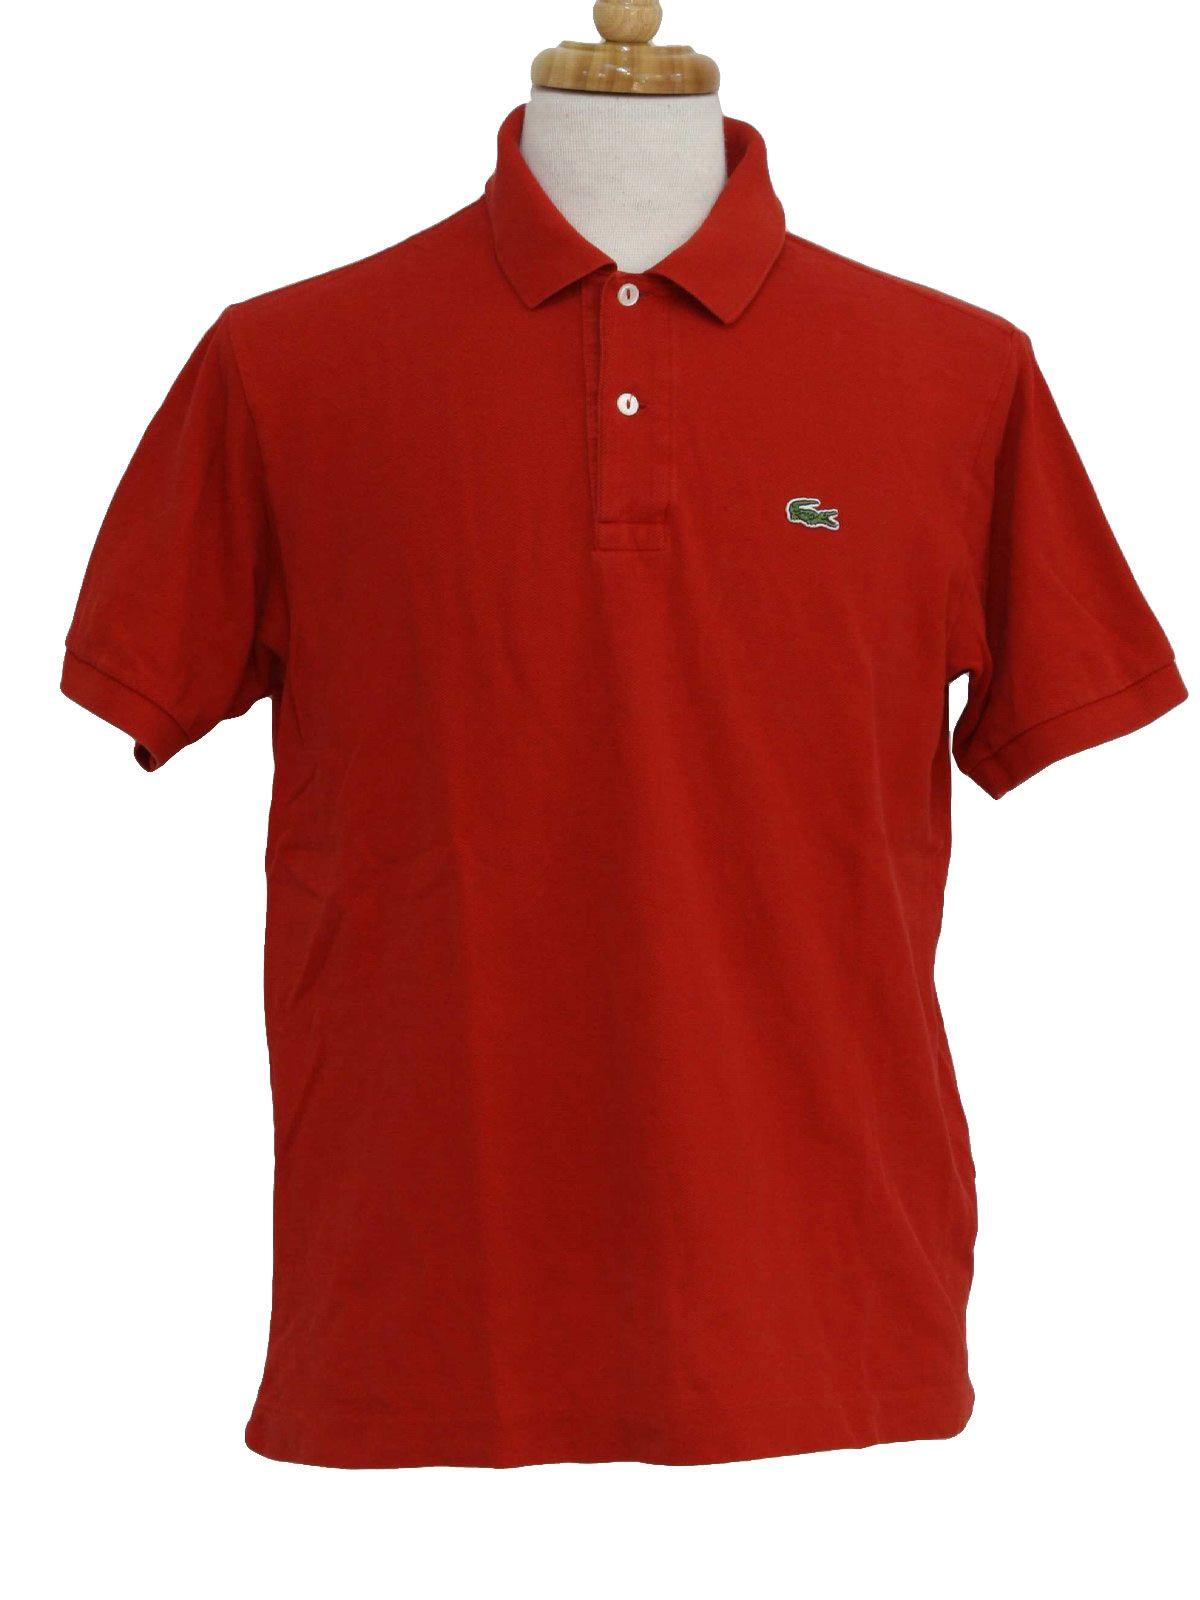 Alligator Clothing Logo - 80's Vintage Shirt: 80s -Lacoste- Mens red woven cotton short sleeve ...